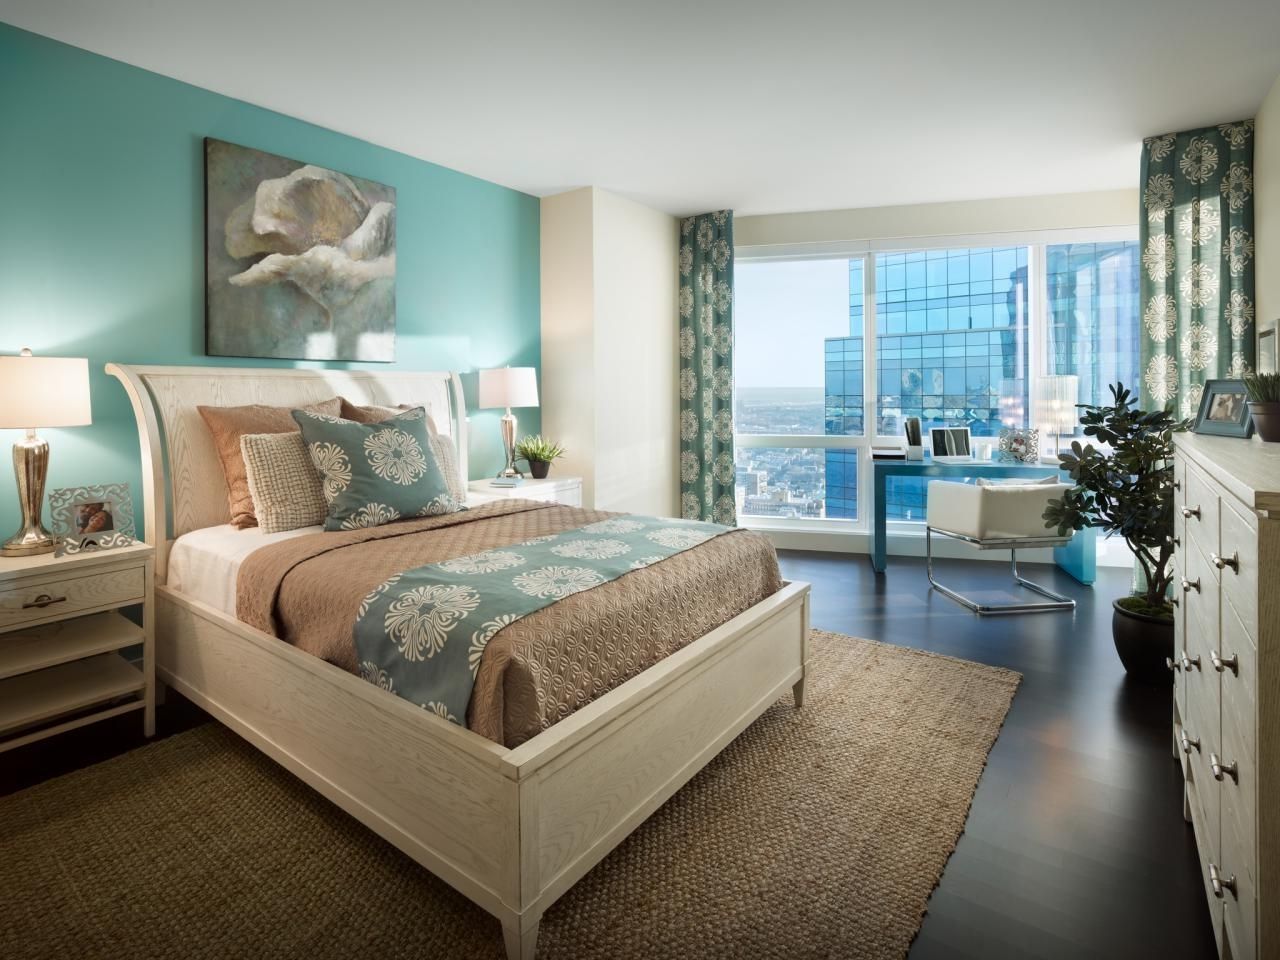 Wall Accents Color Combinations In 2018 Bedroom Design: Stone Accent Wall Accent Wall Color Combinations (View 7 of 15)